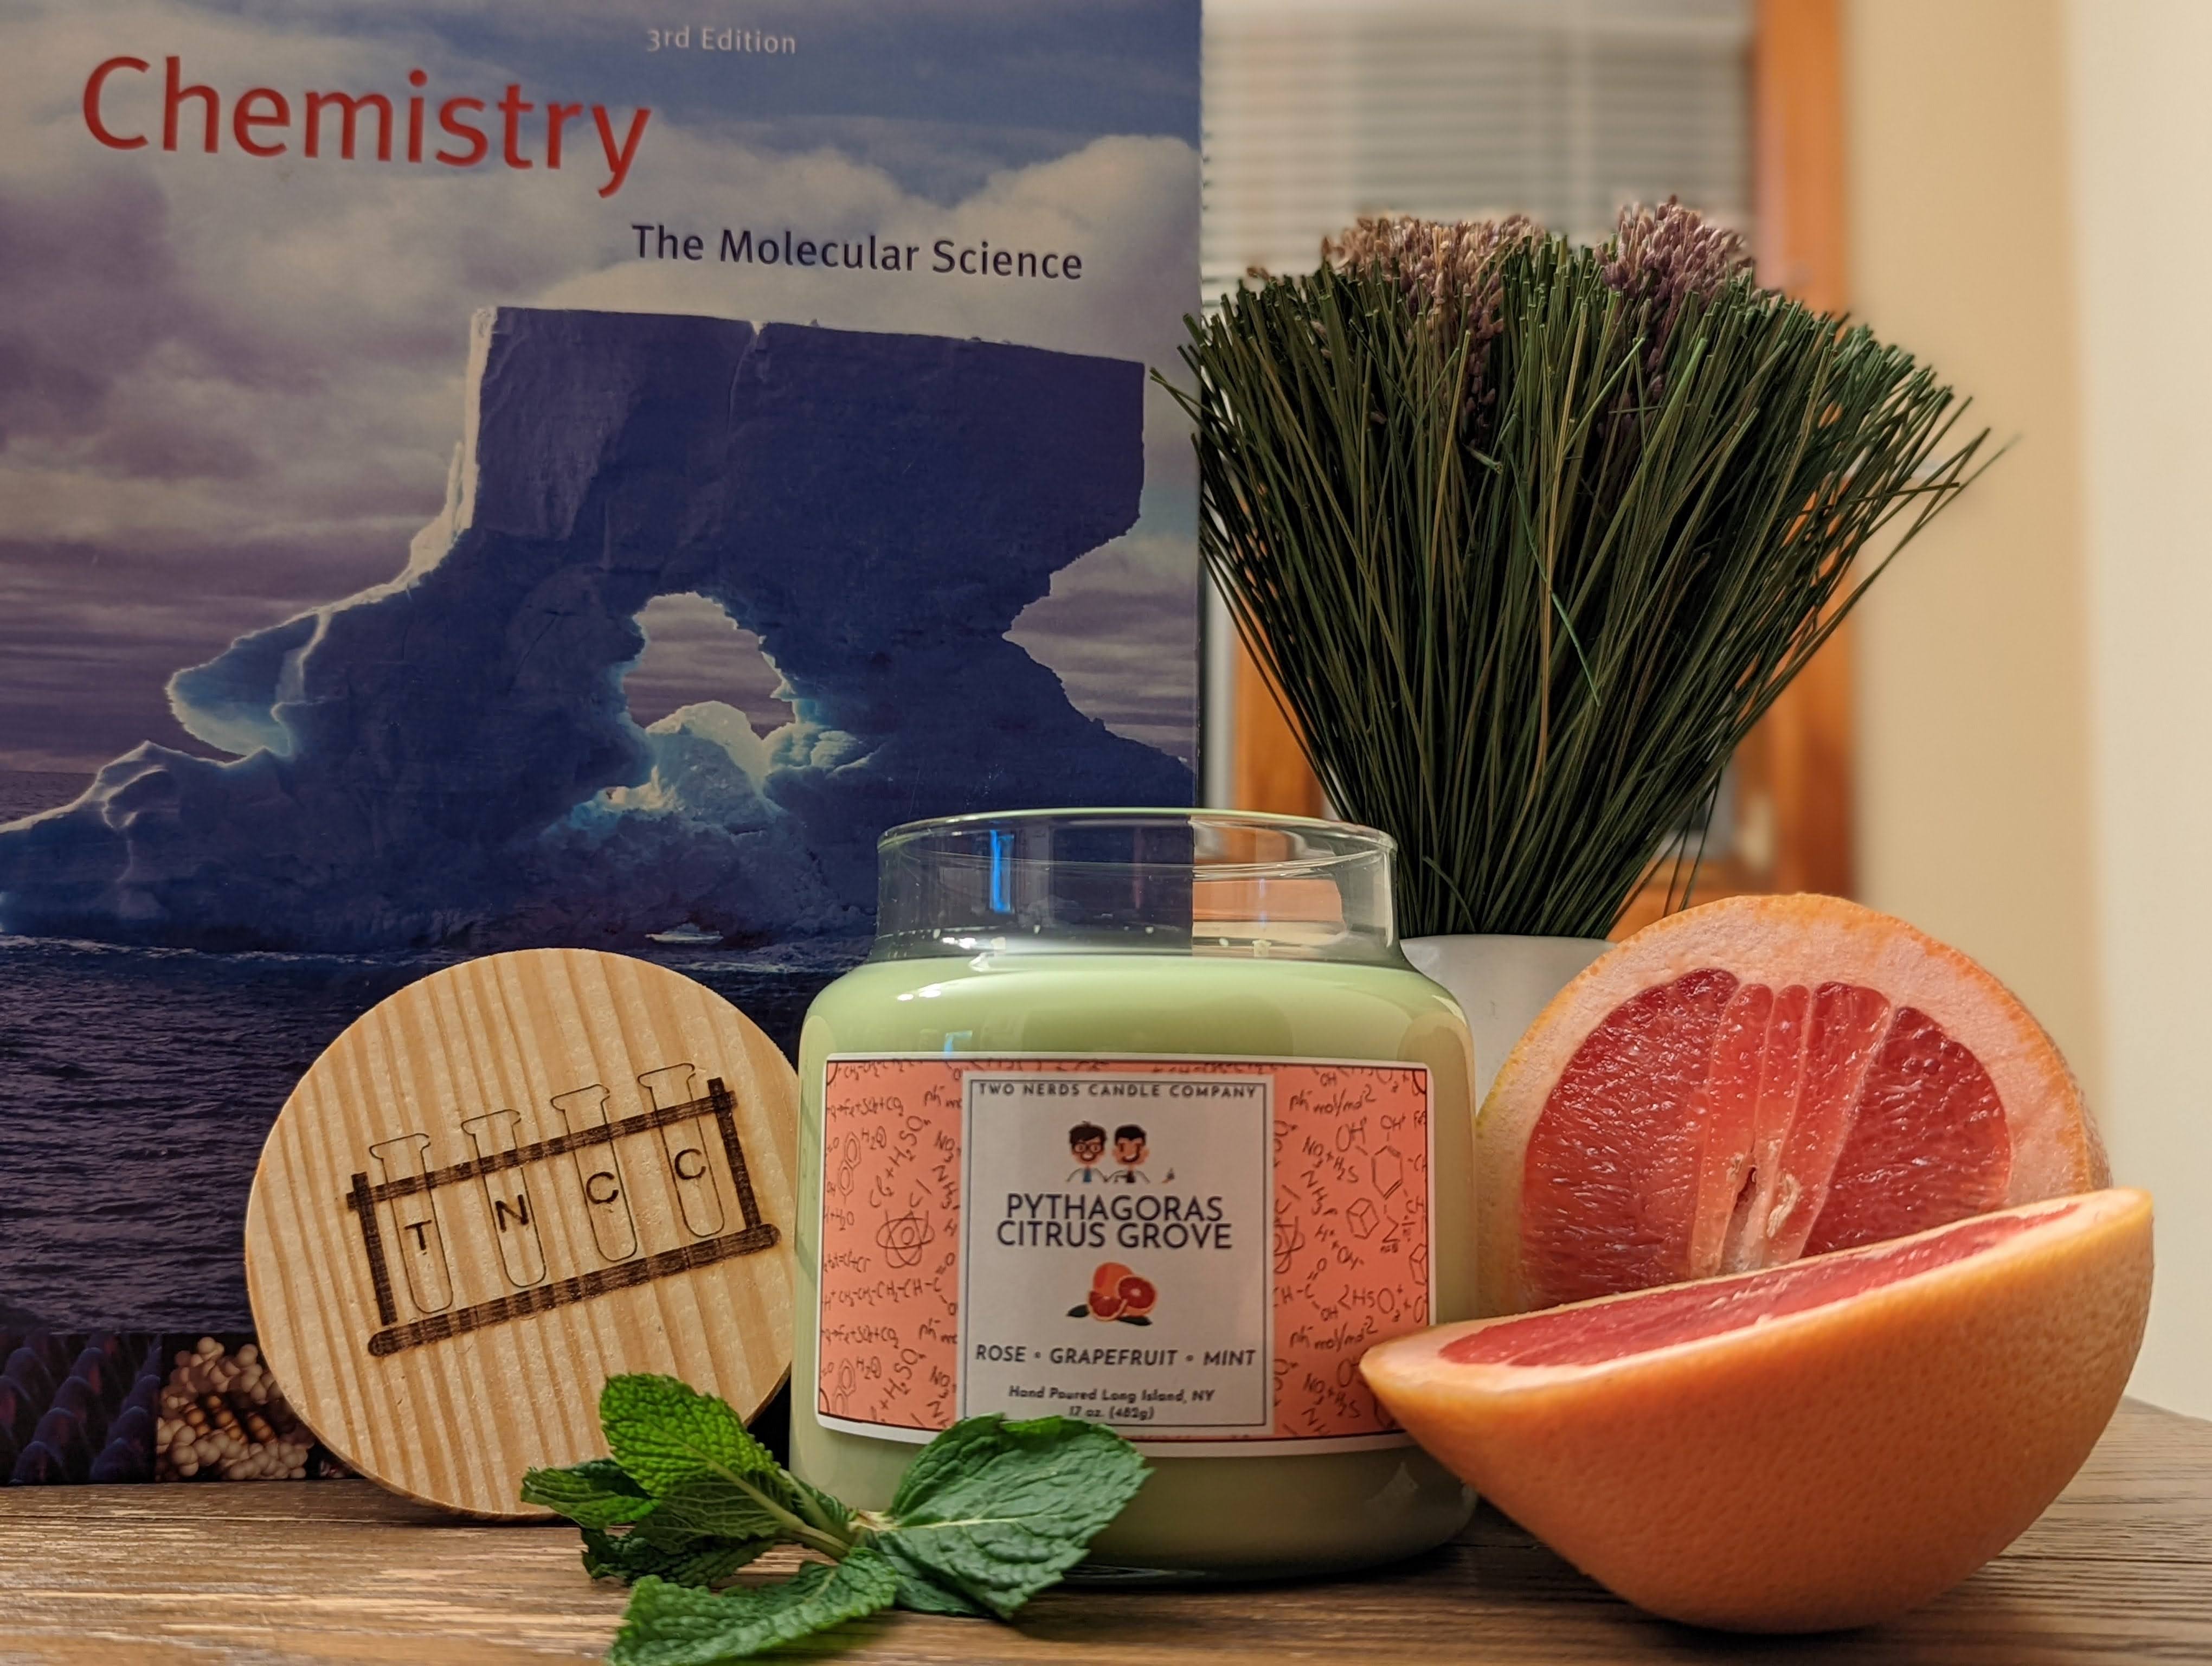 A handmade Pythagoras Citrus Grove scented soy candle with fresh mint and grapefruit and science textbooks in the background